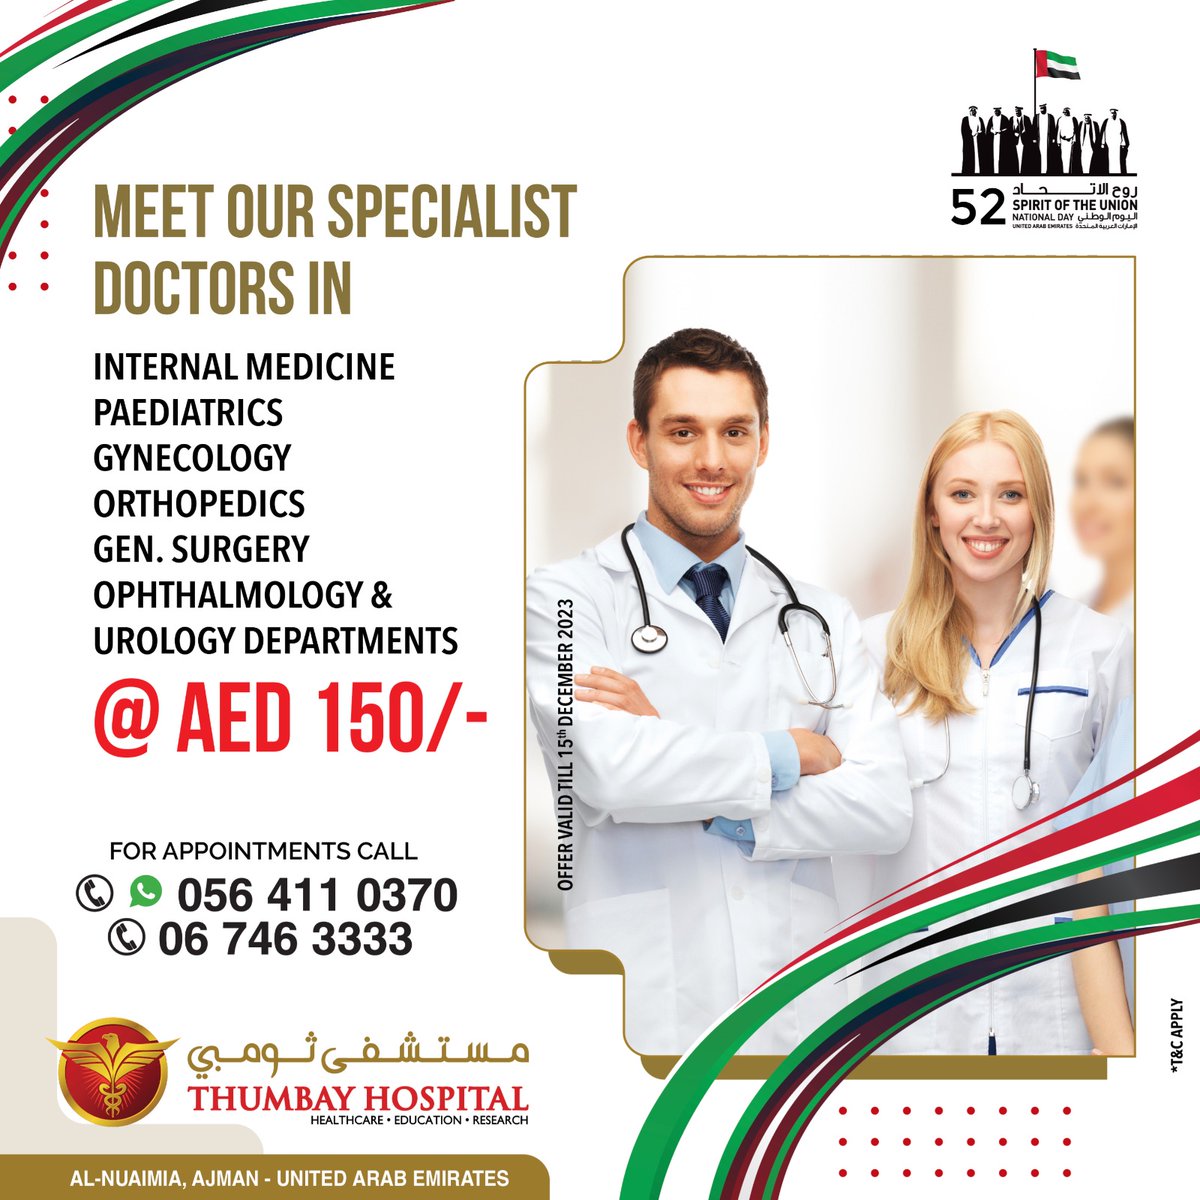 SPECIAL OFFER 
Meet our specialist Doctors @ AED 150

For Appointment Call 067705555 

#thumbay #thumbayhospital #nationalday #uae52 #uaenationalday #specialoffer #specialist #gpdoctors #ajman